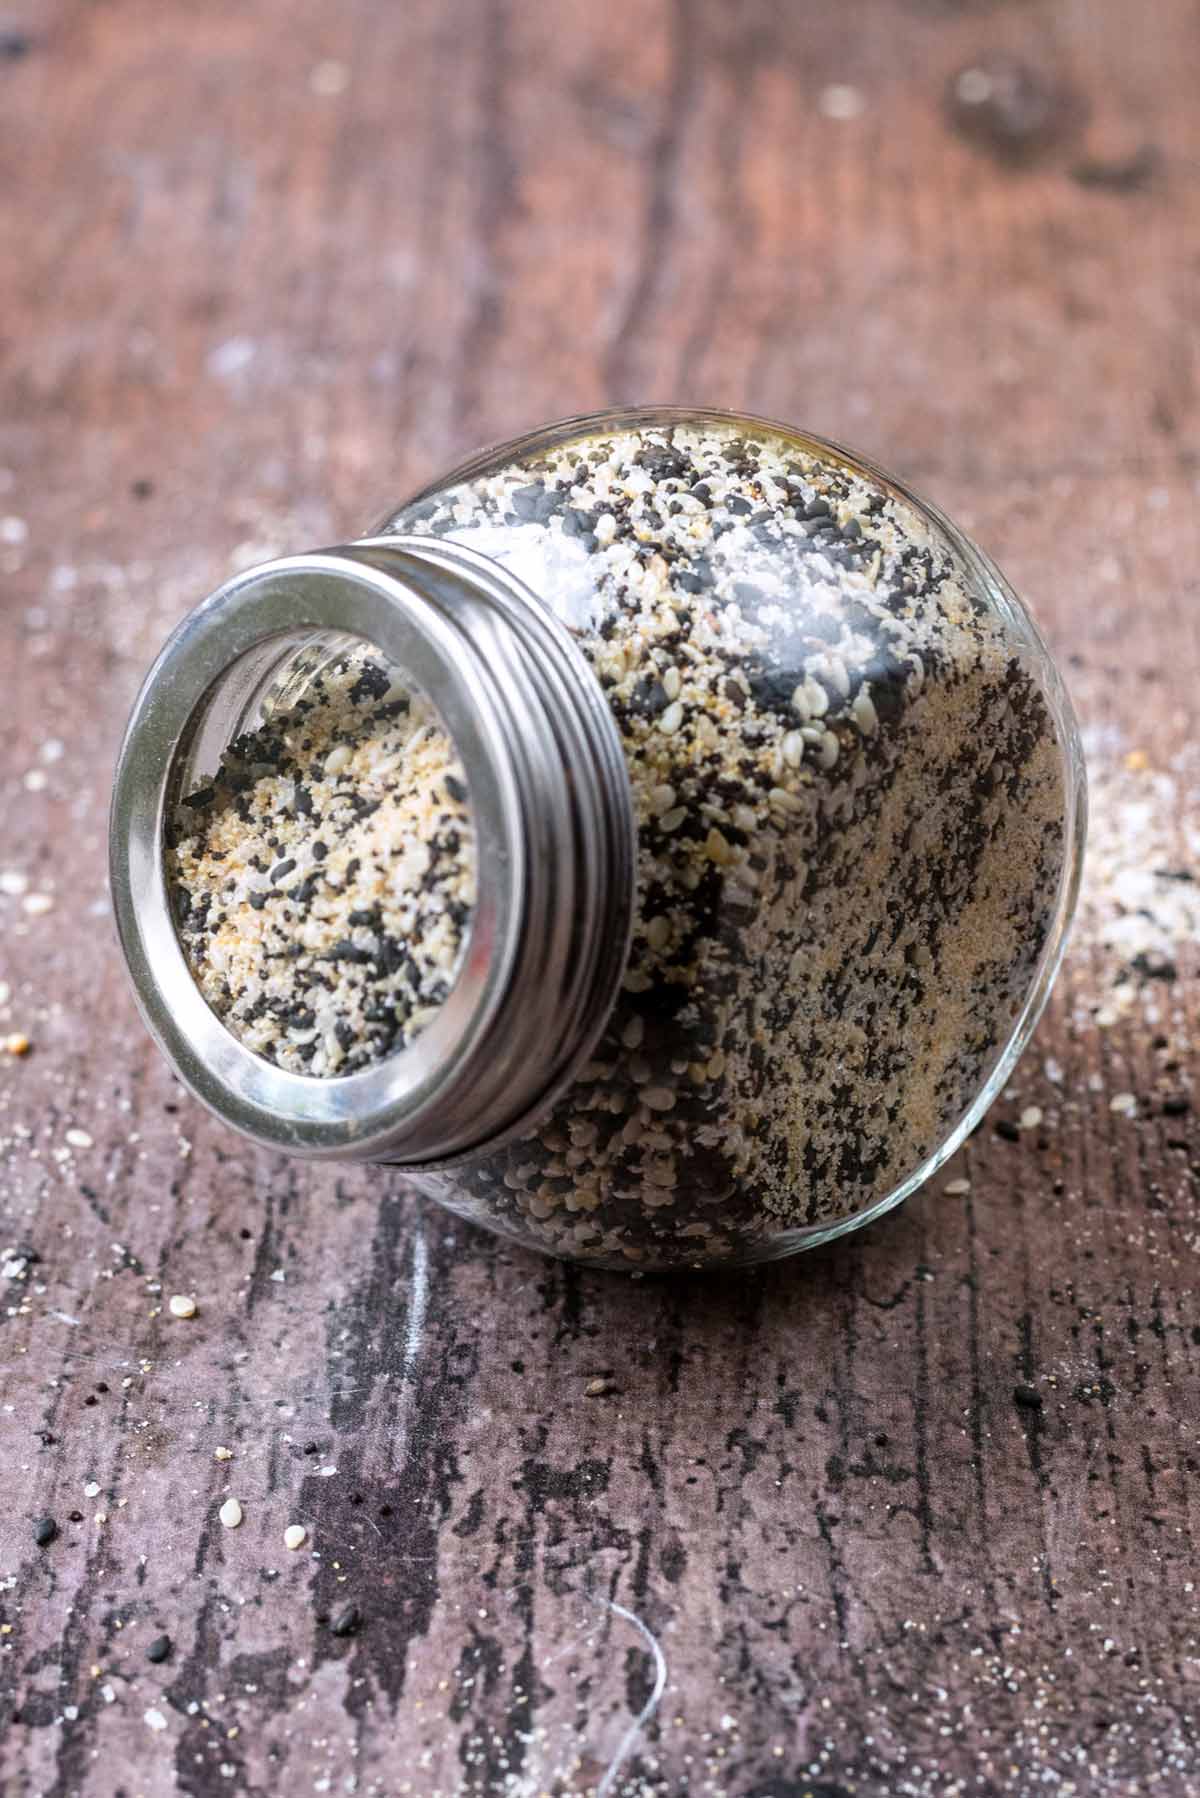 Bagel seasoning in a glass jar with a lid on.